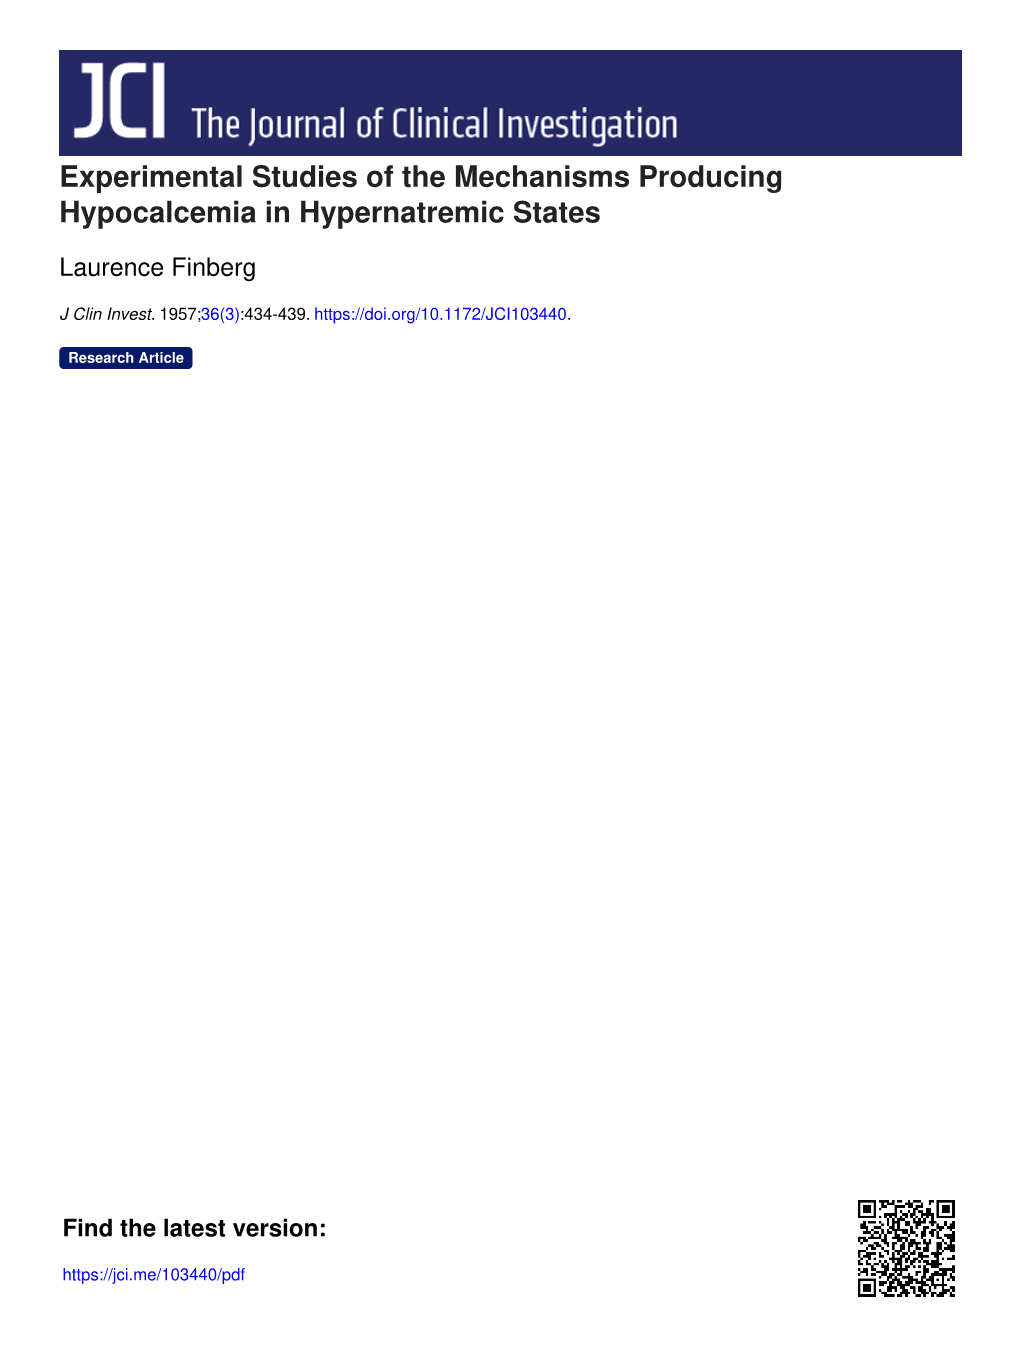 Experimental Studies of the Mechanisms Producing Hypocalcemia in Hypernatremic States